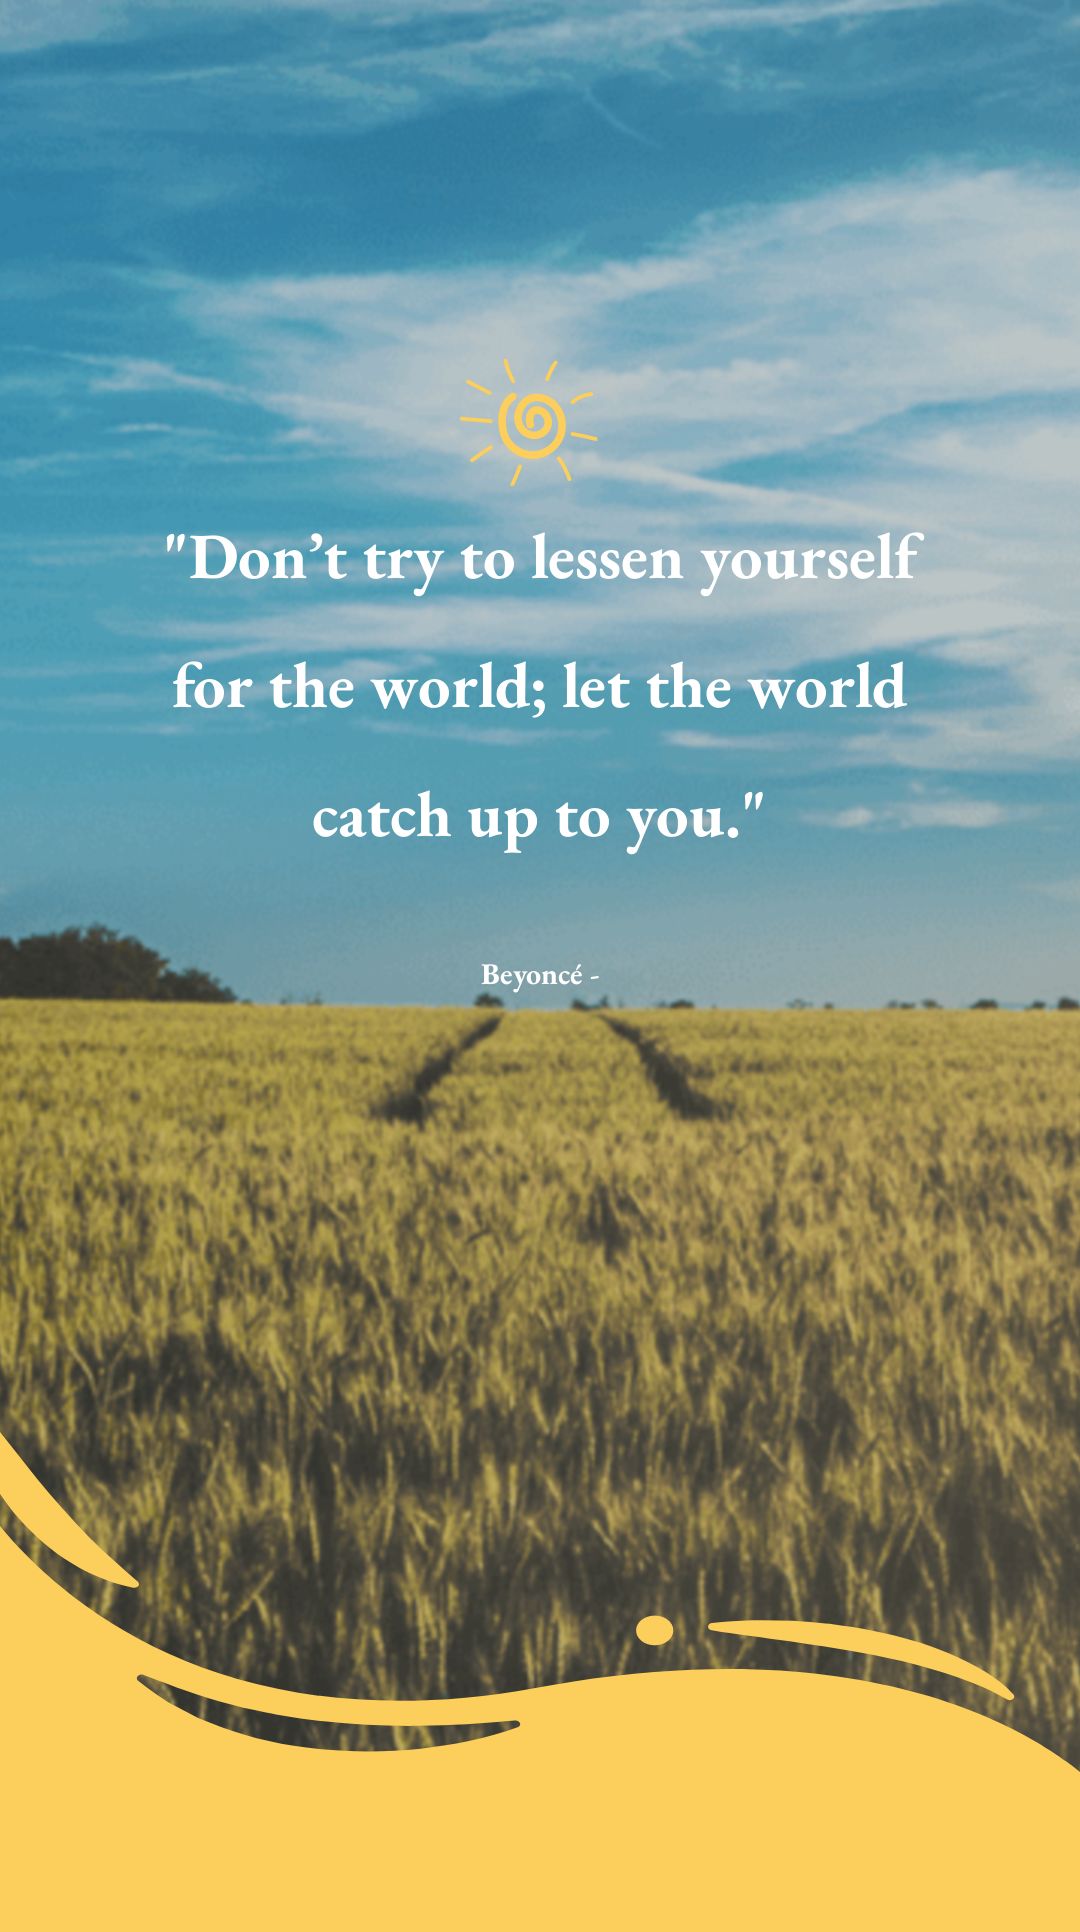 Beyoncé - Don’t try to lessen yourself for the world; let the world catch up to you.